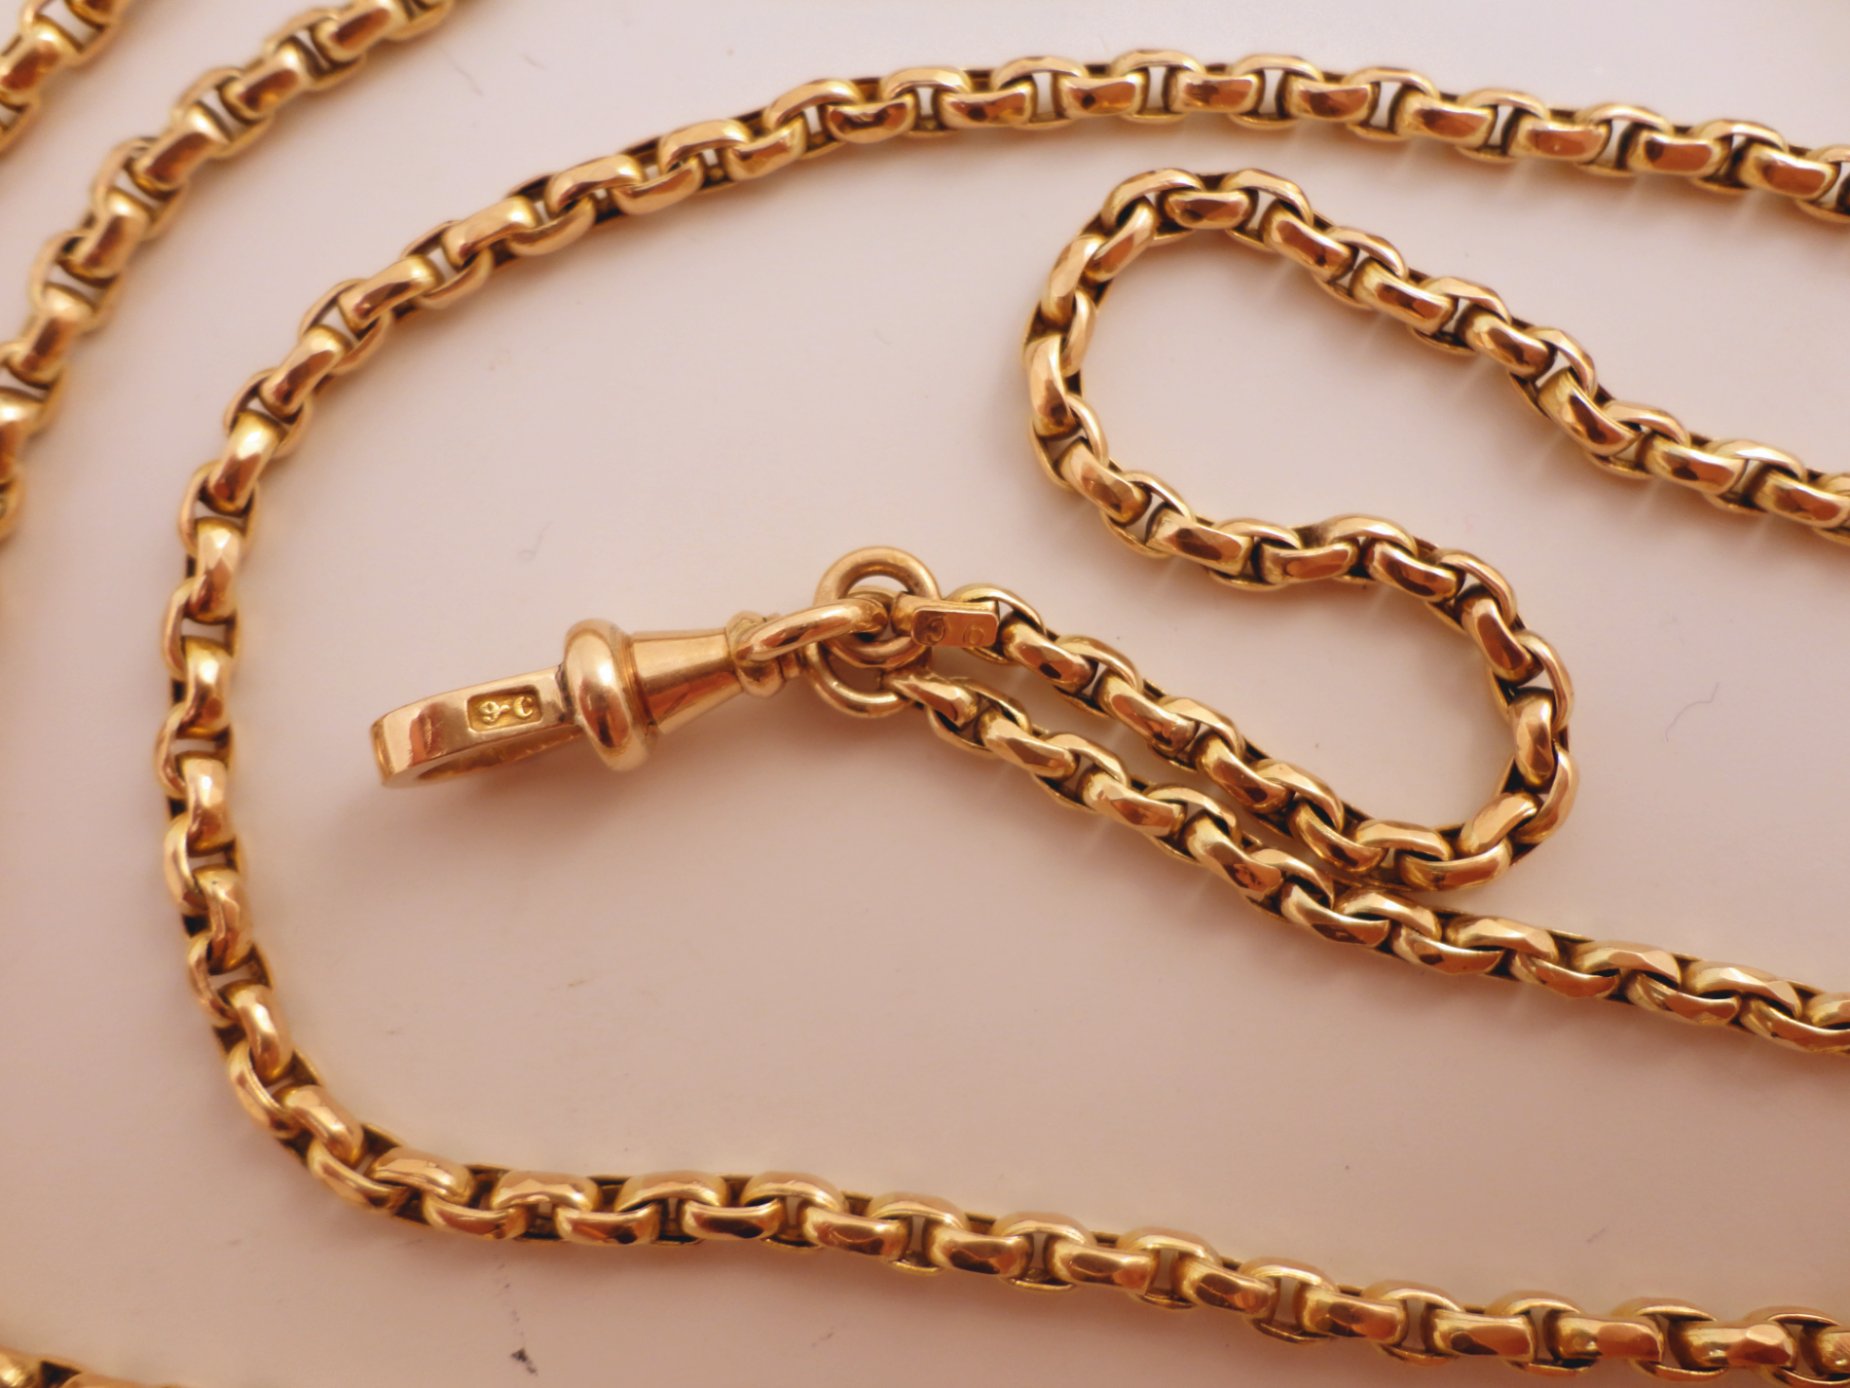 Antique 9ct rose gold 60 inch guard, ladies fob watch chain. 32.5 grams ...